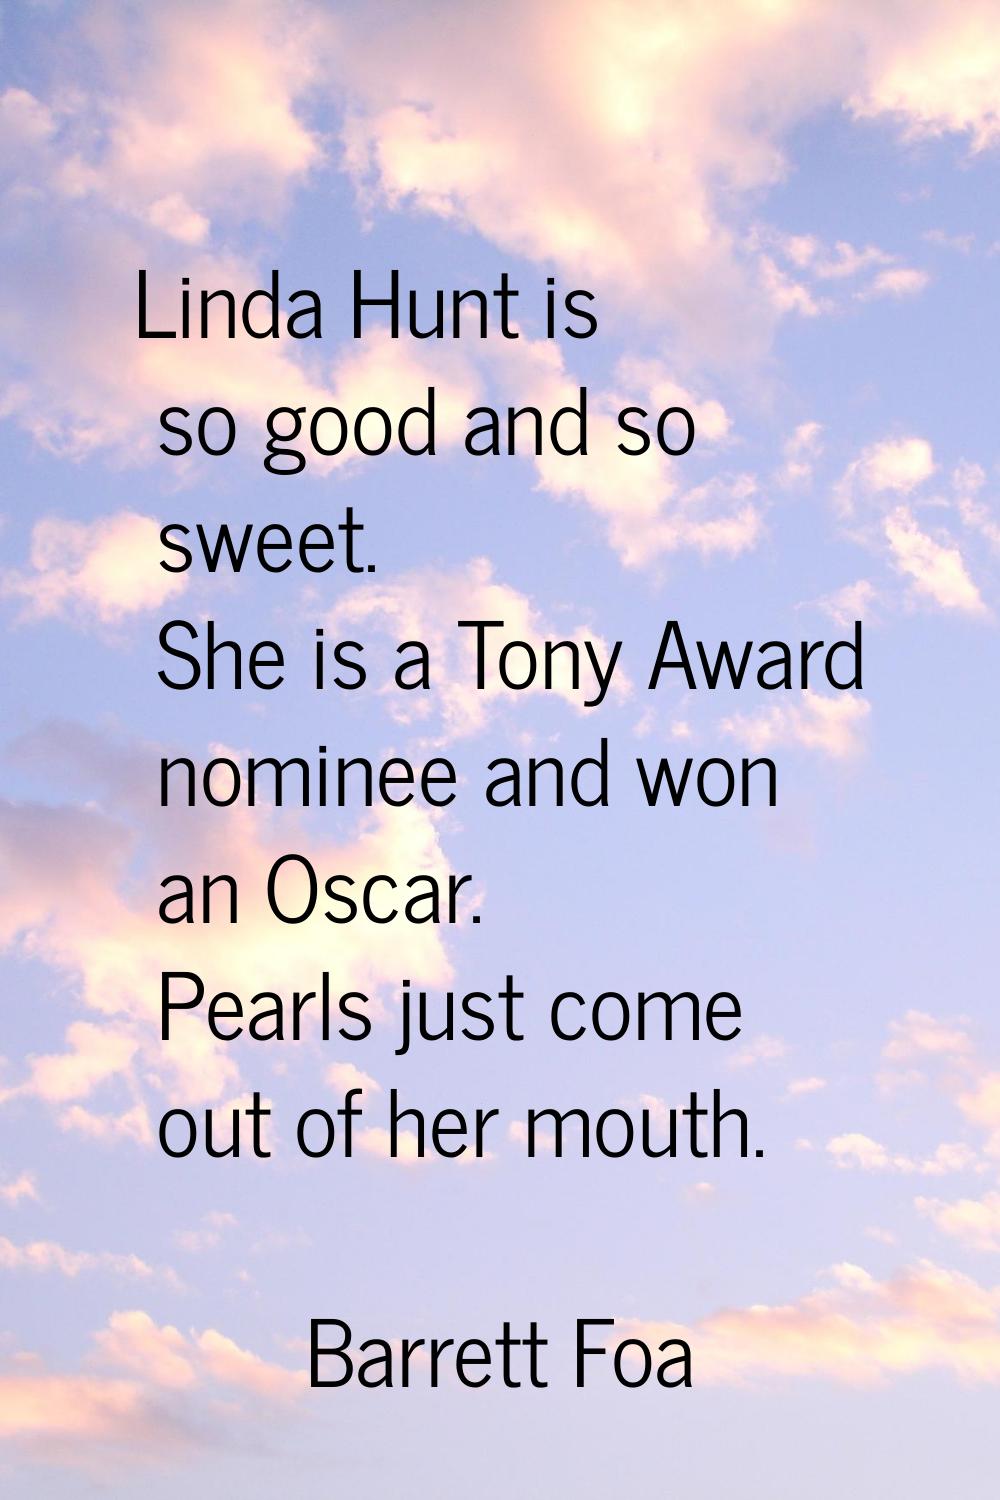 Linda Hunt is so good and so sweet. She is a Tony Award nominee and won an Oscar. Pearls just come 